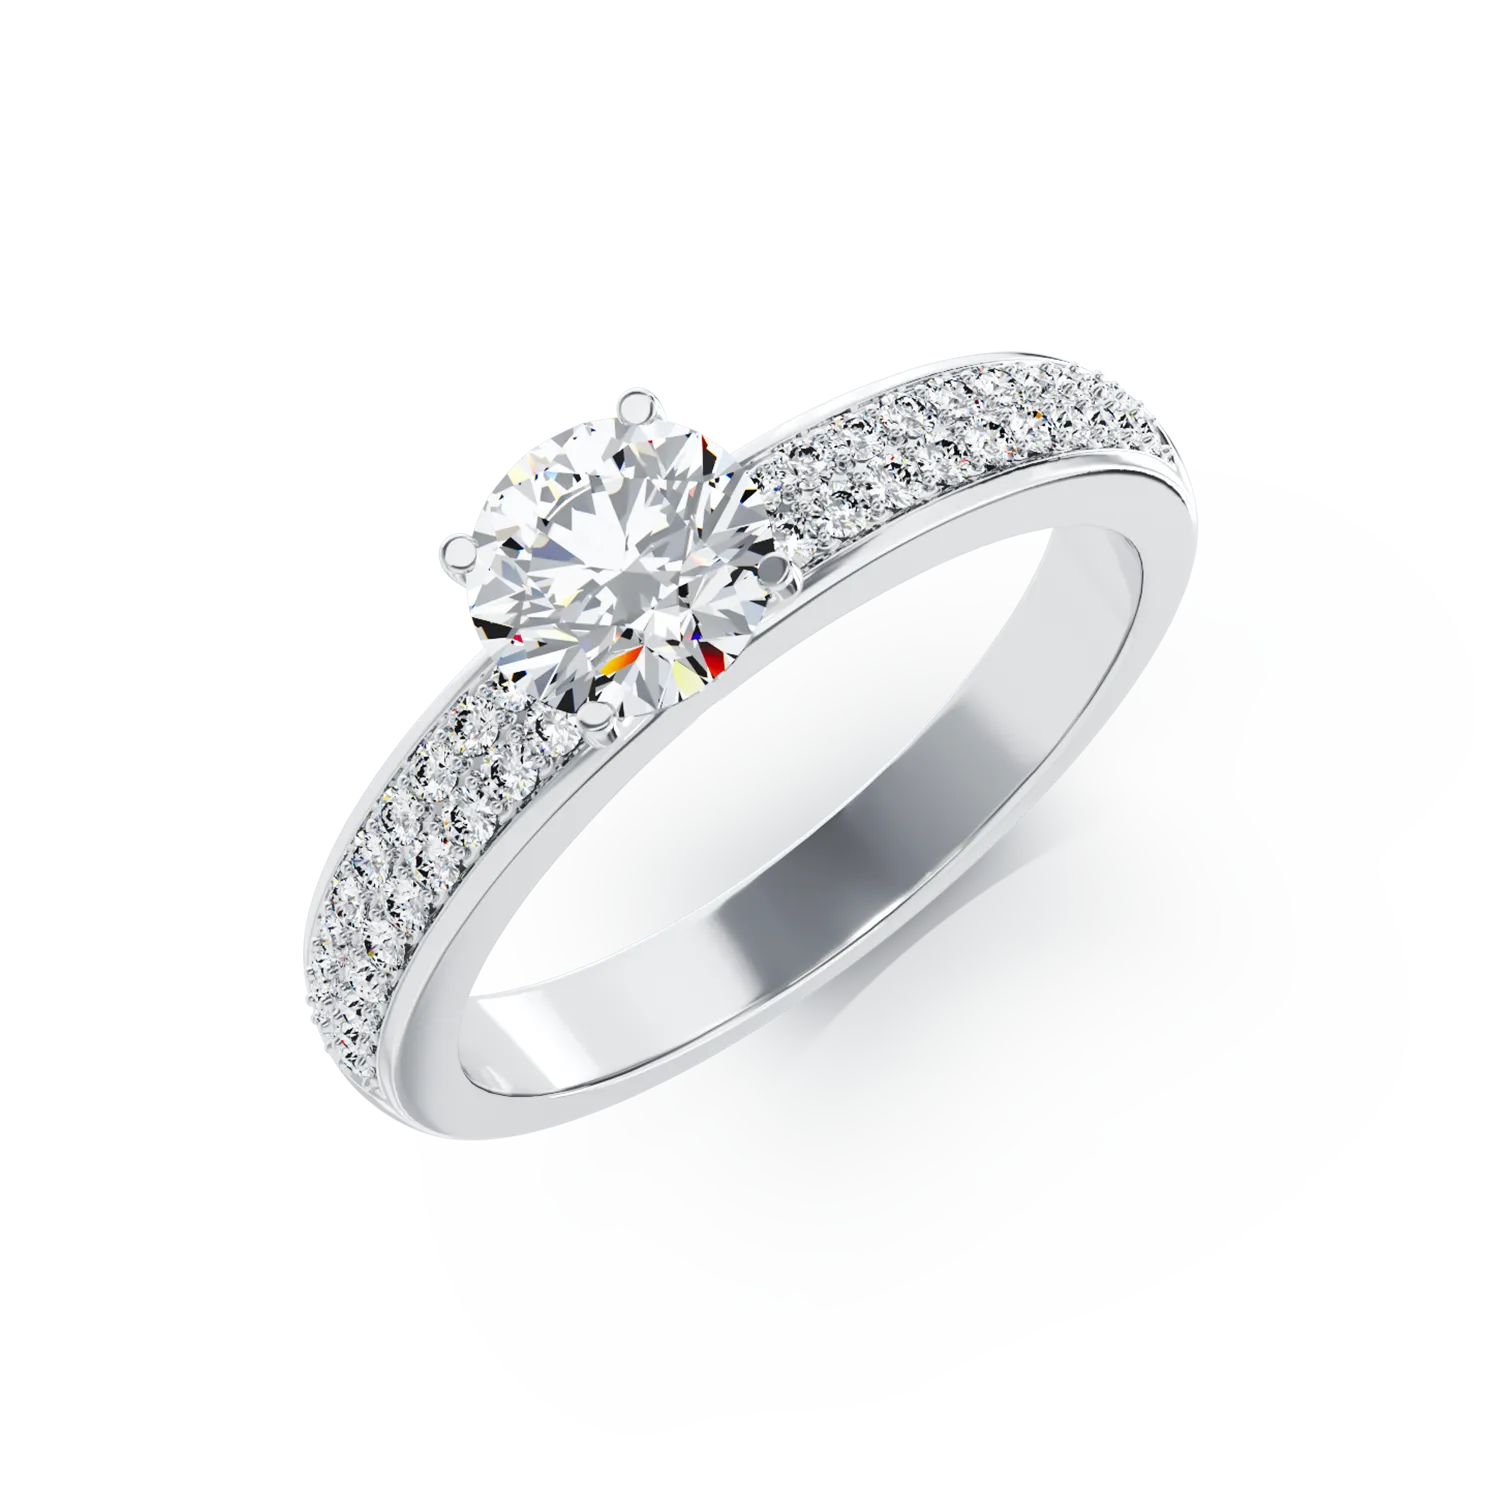 18K white gold engagement ring with 0.61ct diamond and 0.2ct diamonds